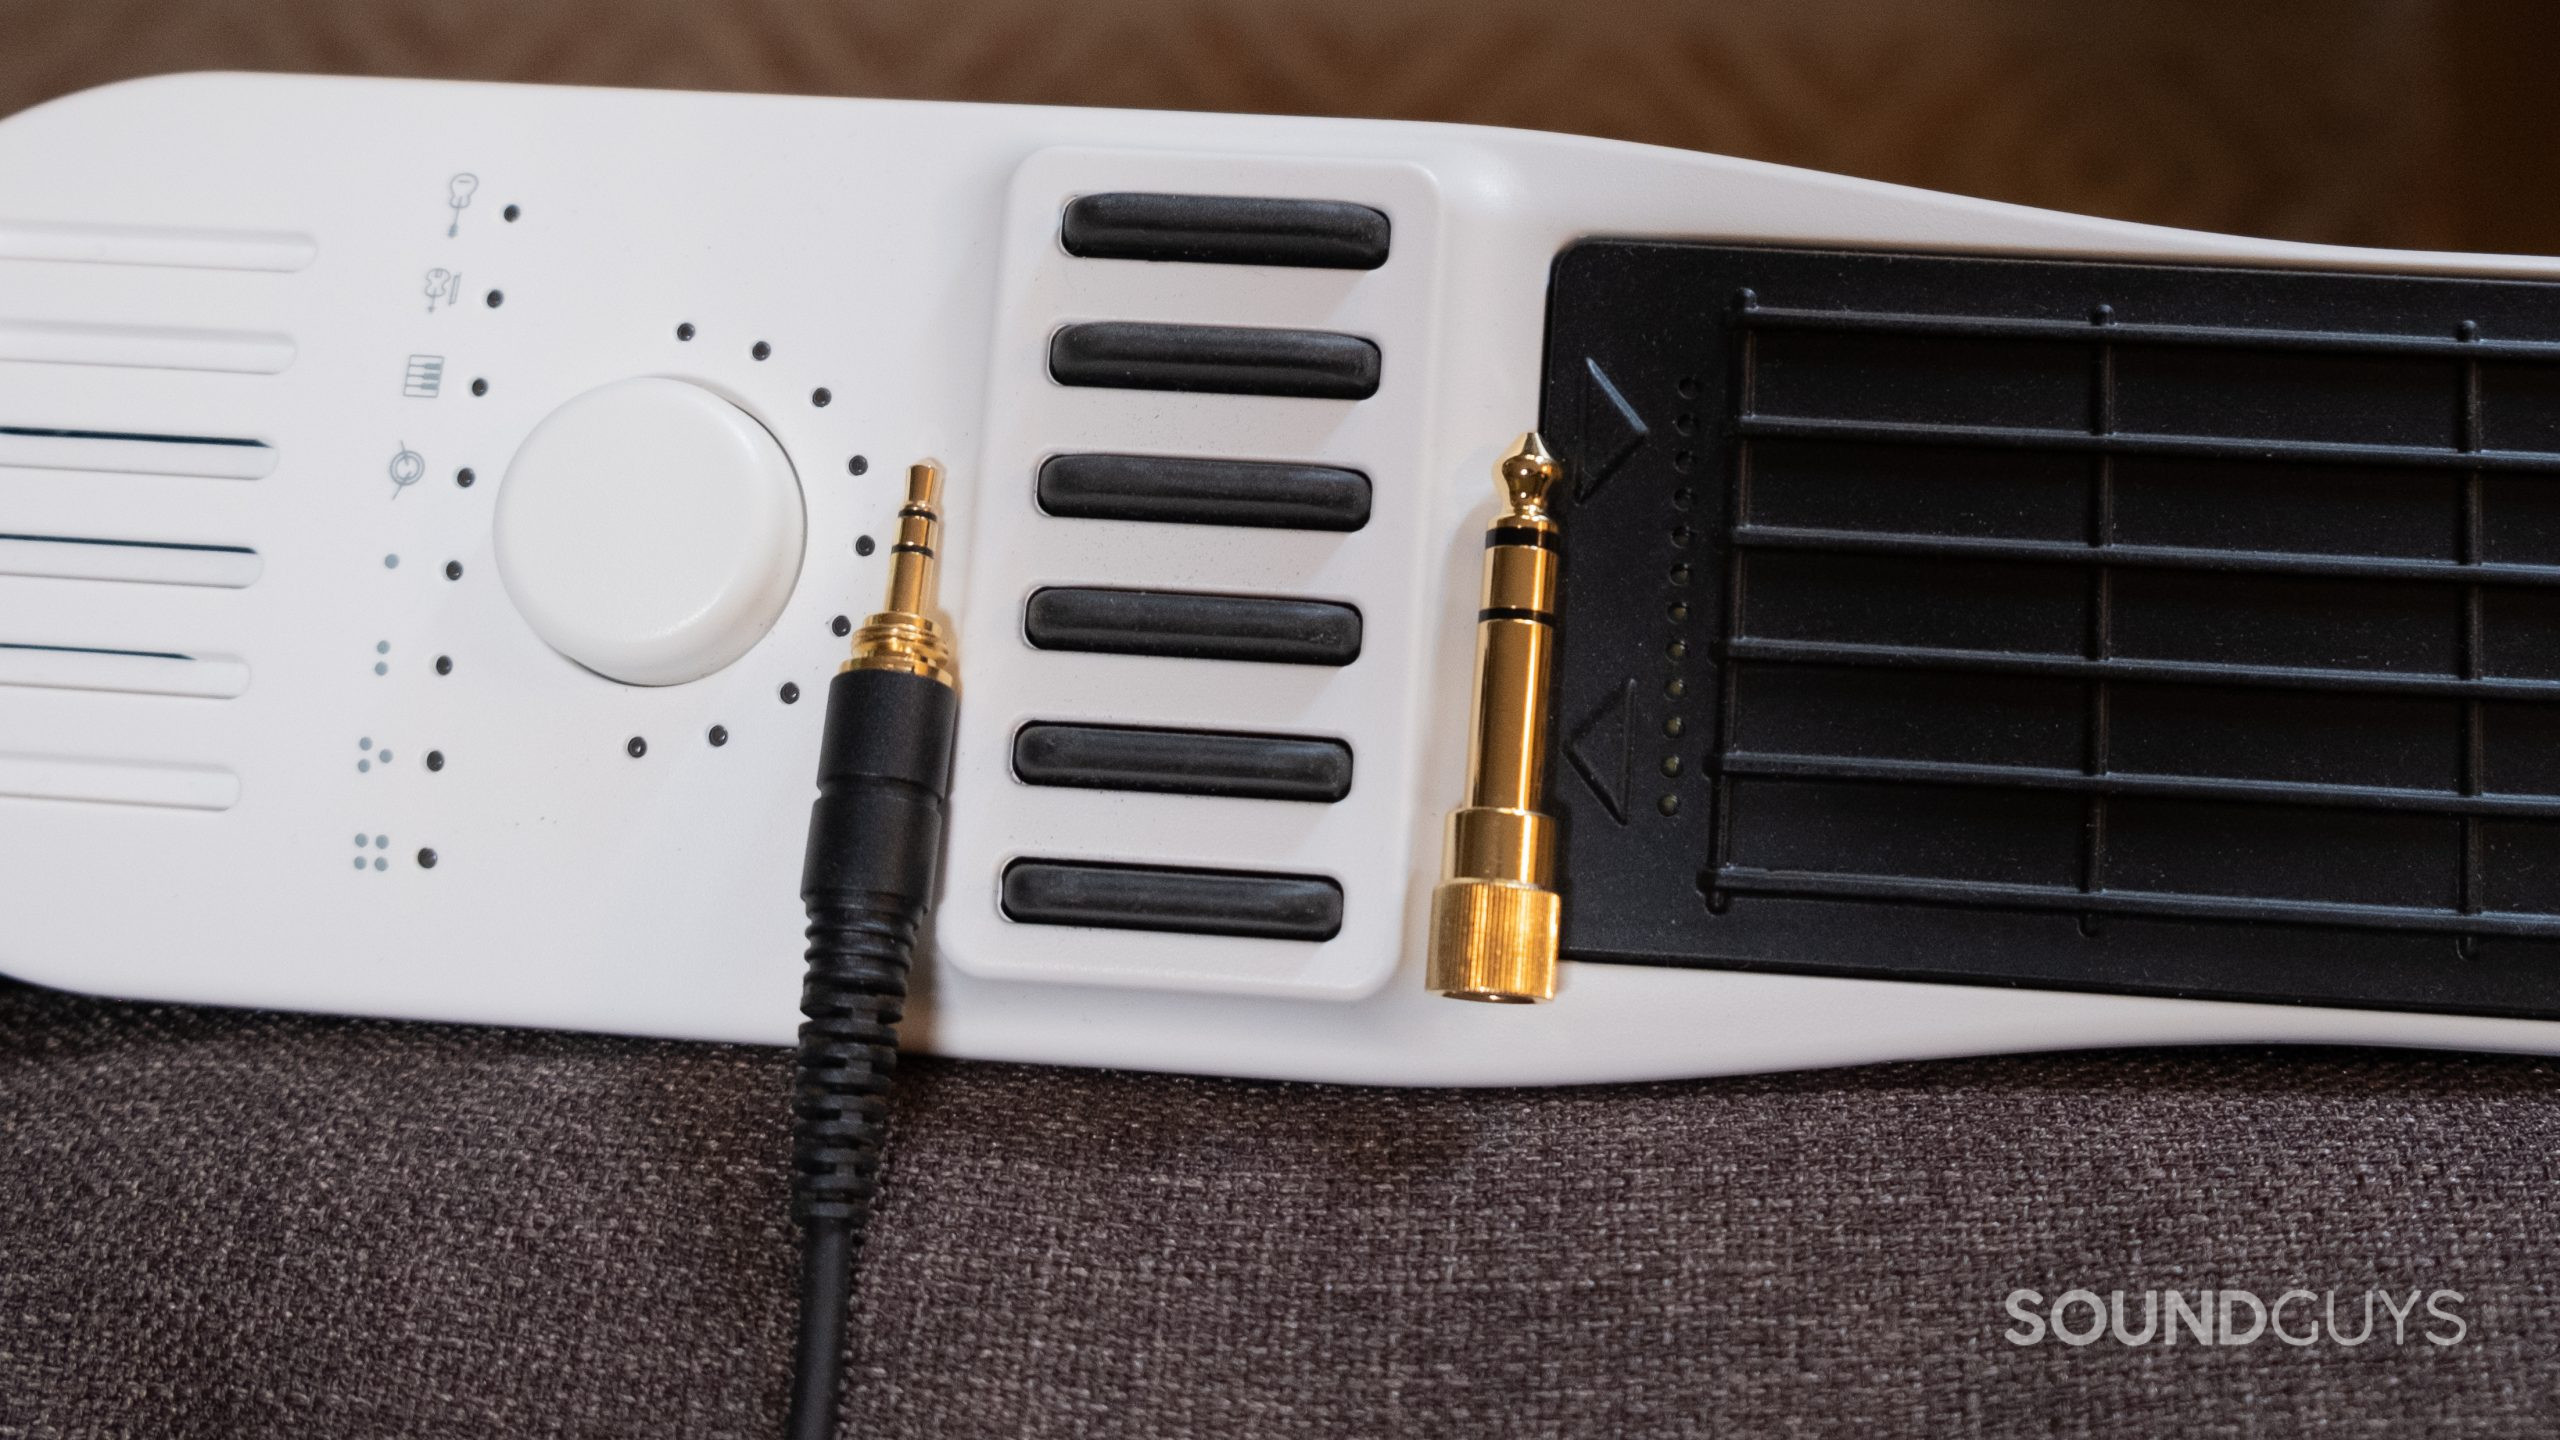 The 3.5mm headphone jack with the 1/4-inch adapter included with the AKG K702 shown resting on a midi controller.